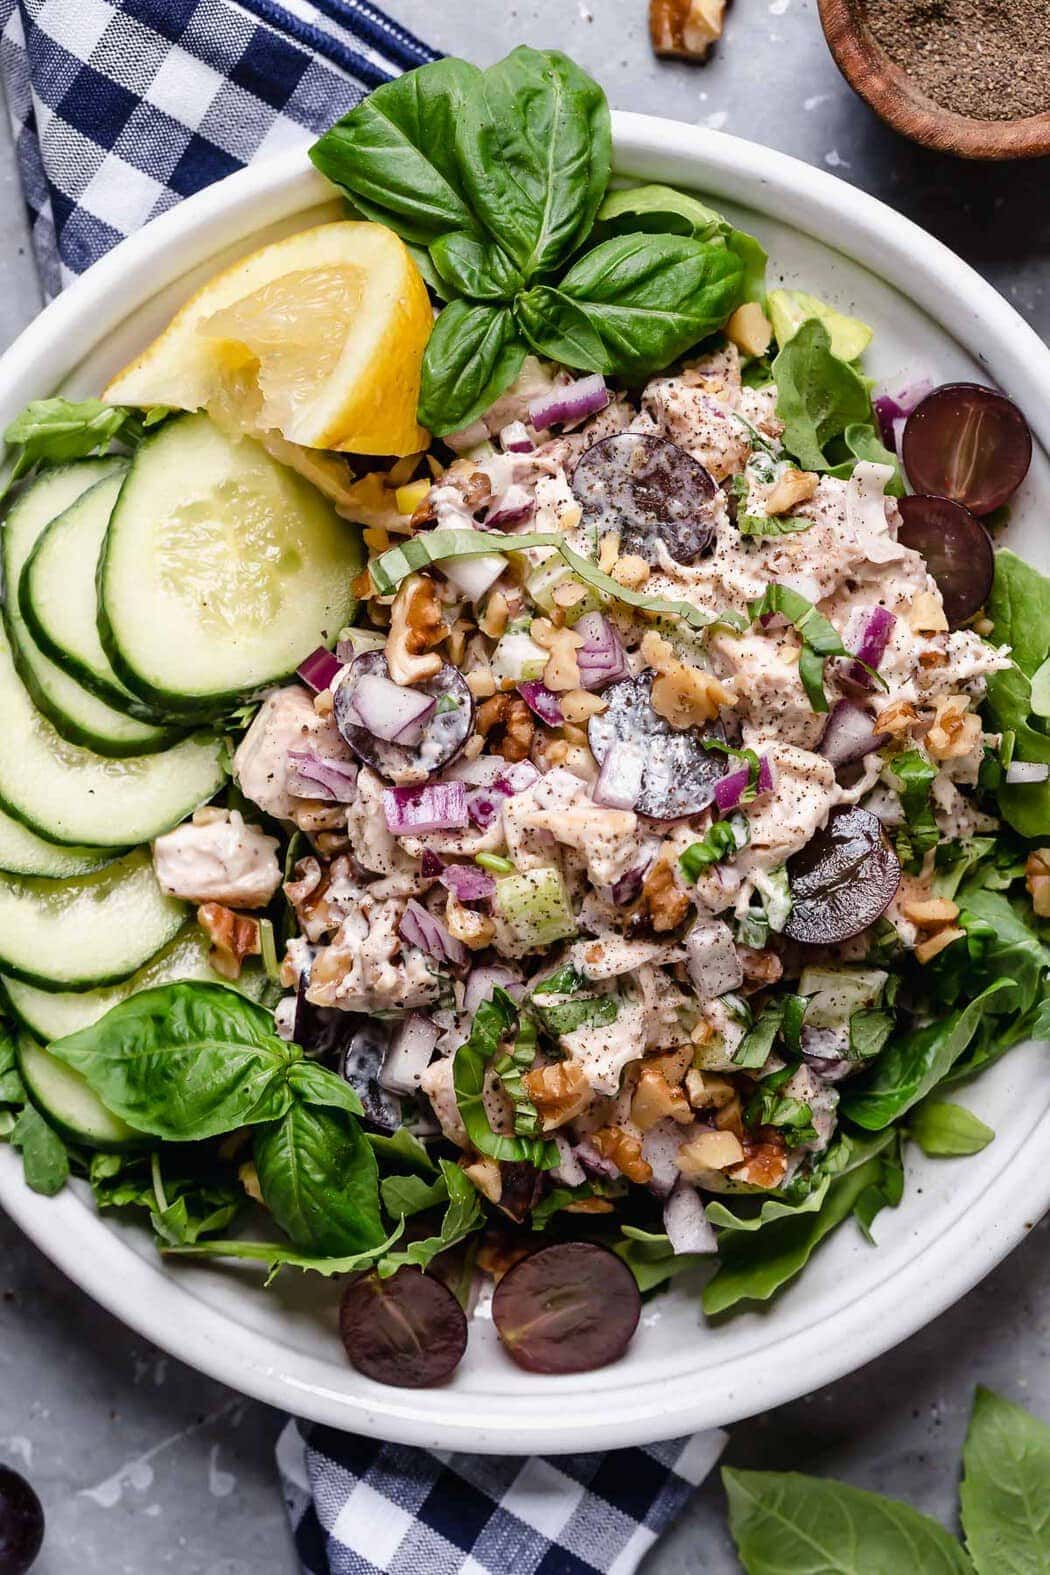 Plate filled with a bed of greens topped with chicken Waldorf salad garnished with cucumbers, grapes and lemon over a checkered napkin